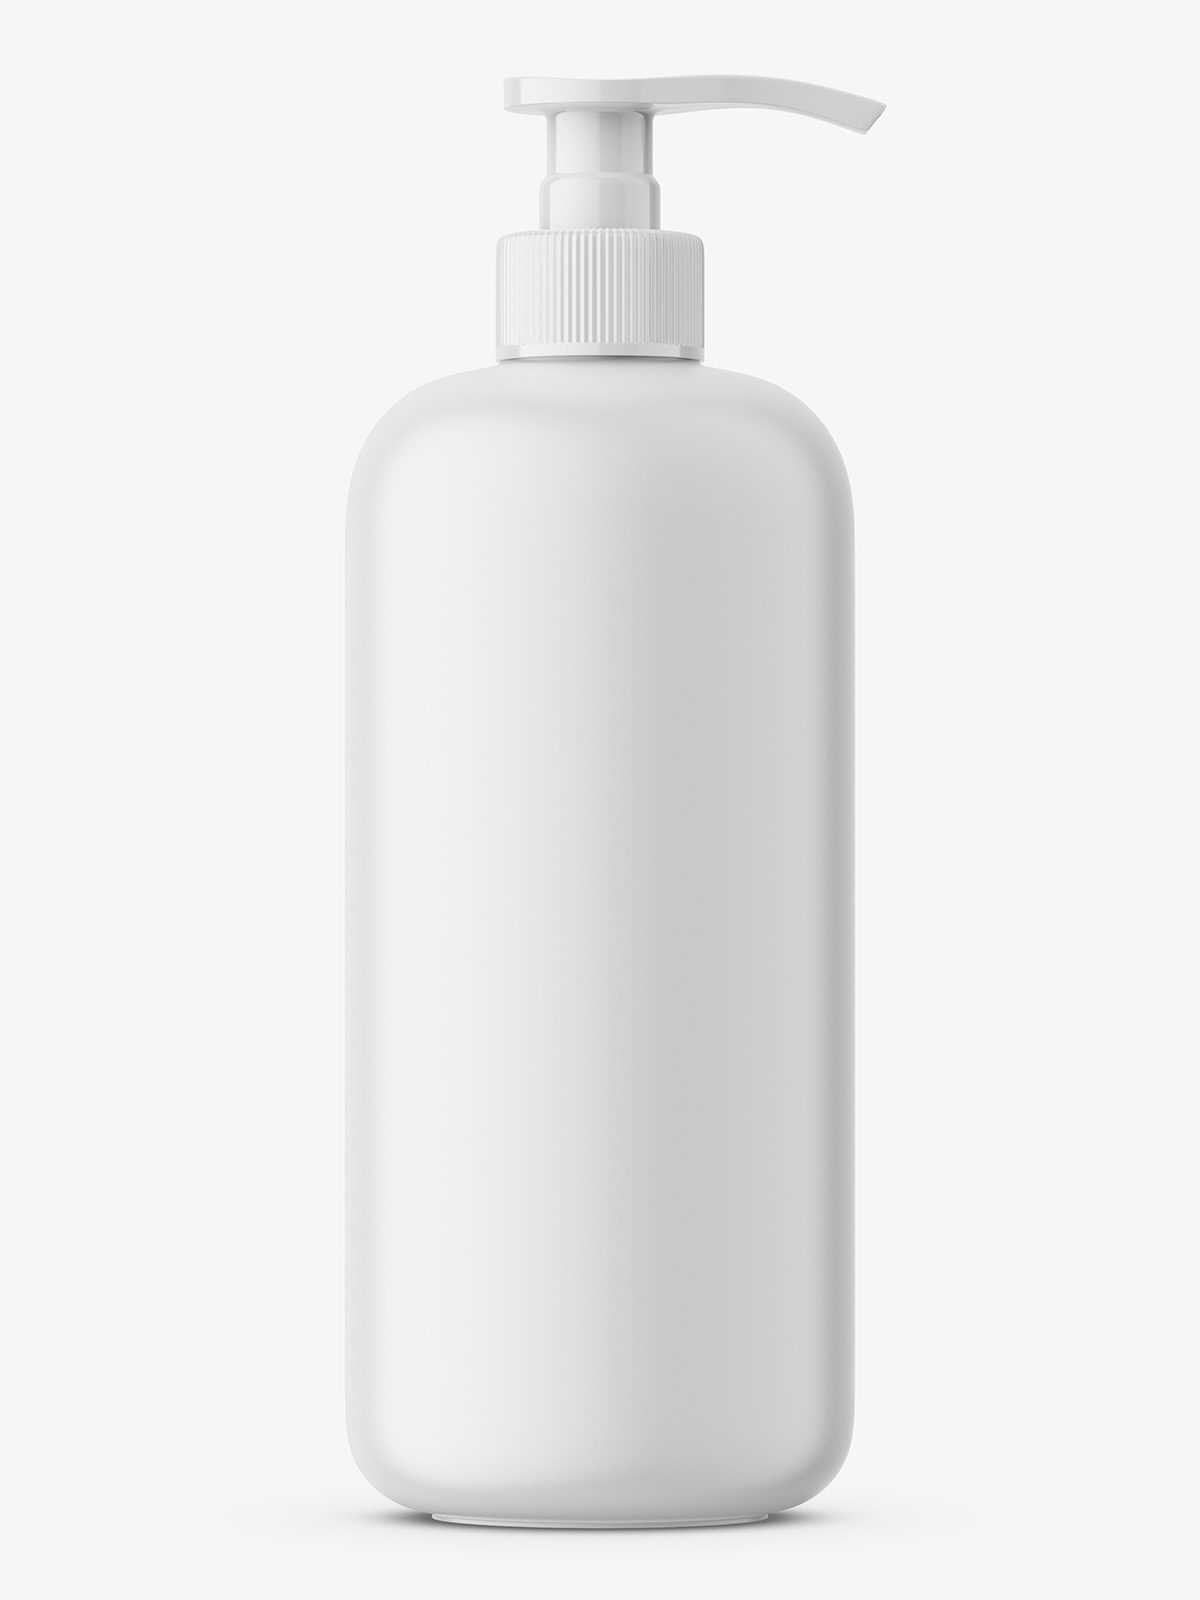 Shampoo bottle with - Smarty